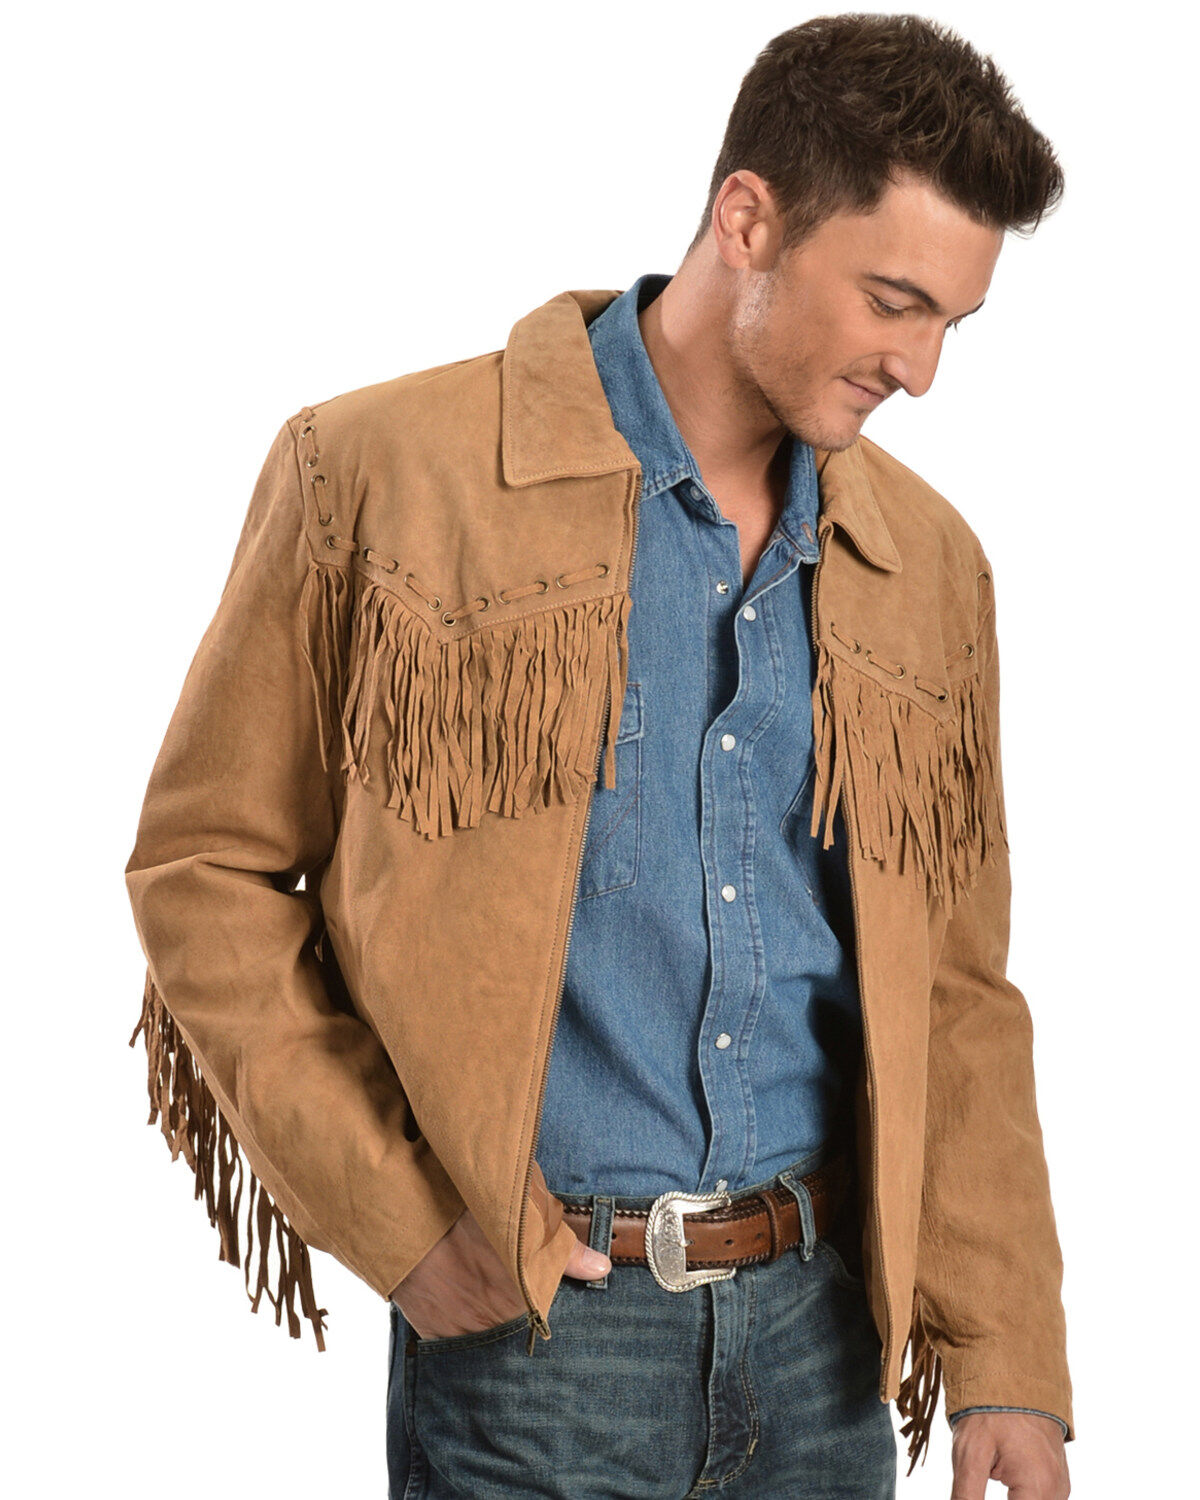 Mens Western Suede Leather Jacket with Tassels and Fringe Cowboy Leather Jacket